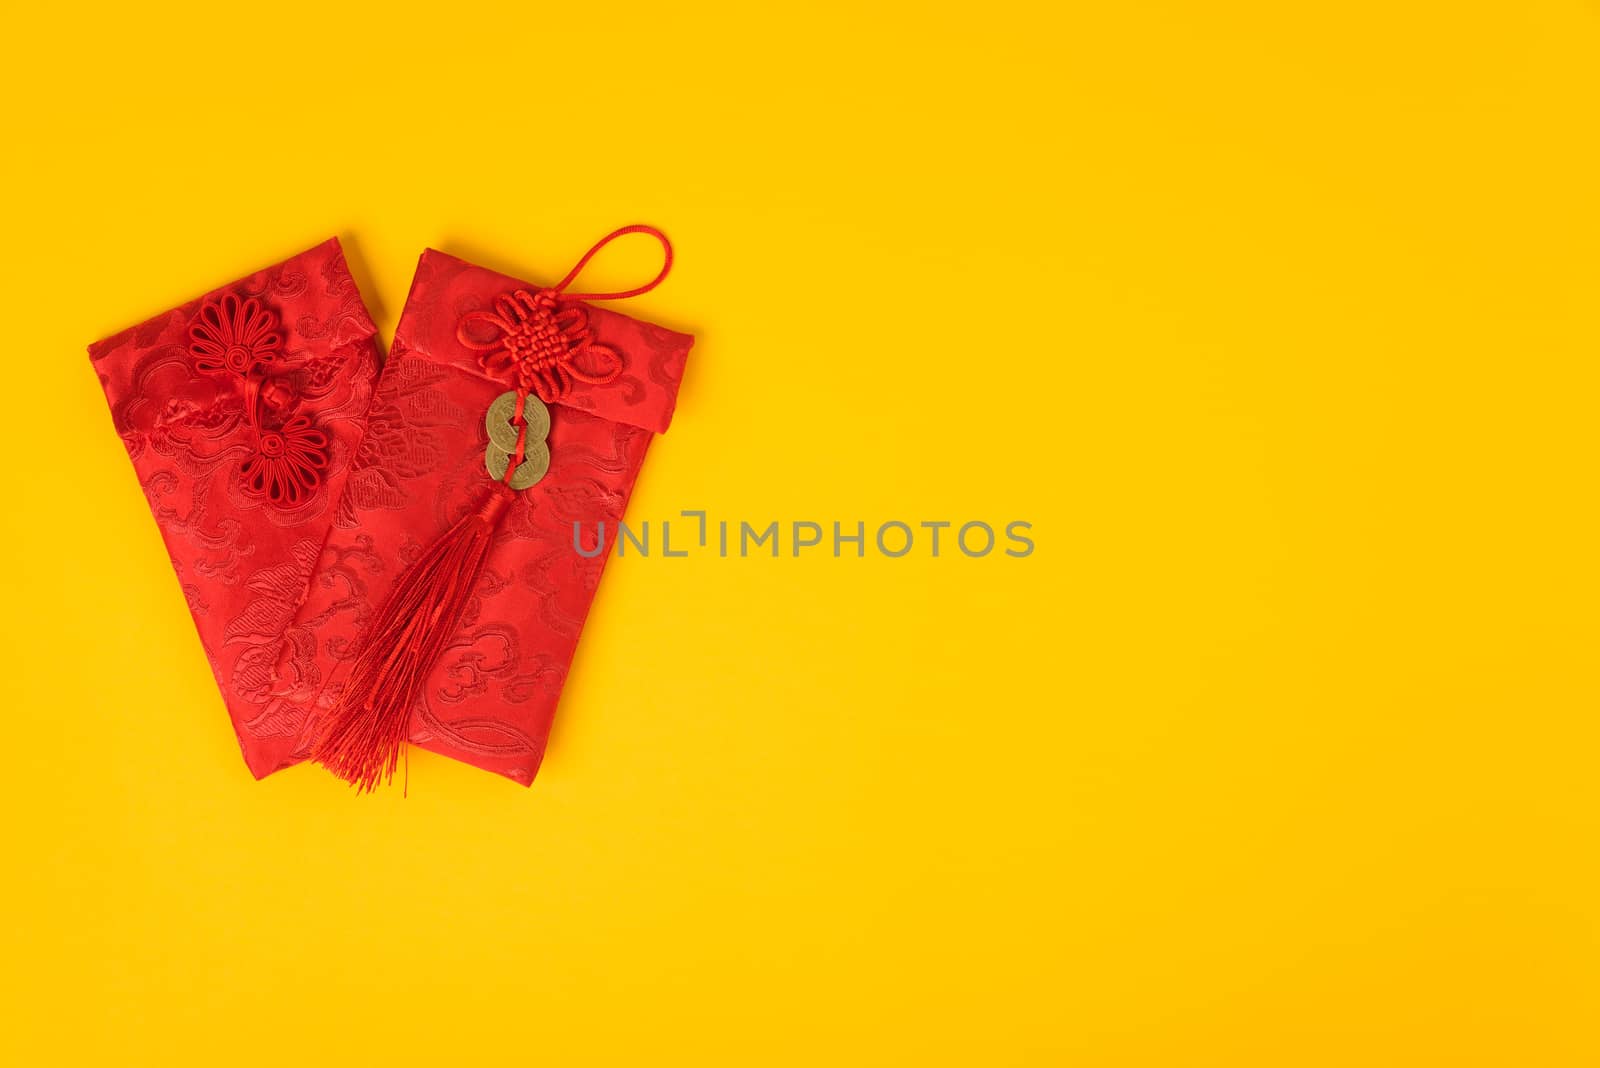 Chinese new year festival concept, flat lay top view, Happy Chinese new year with Red envelope (Character "FU" means fortune, blessing) on yellow background with copy space for text